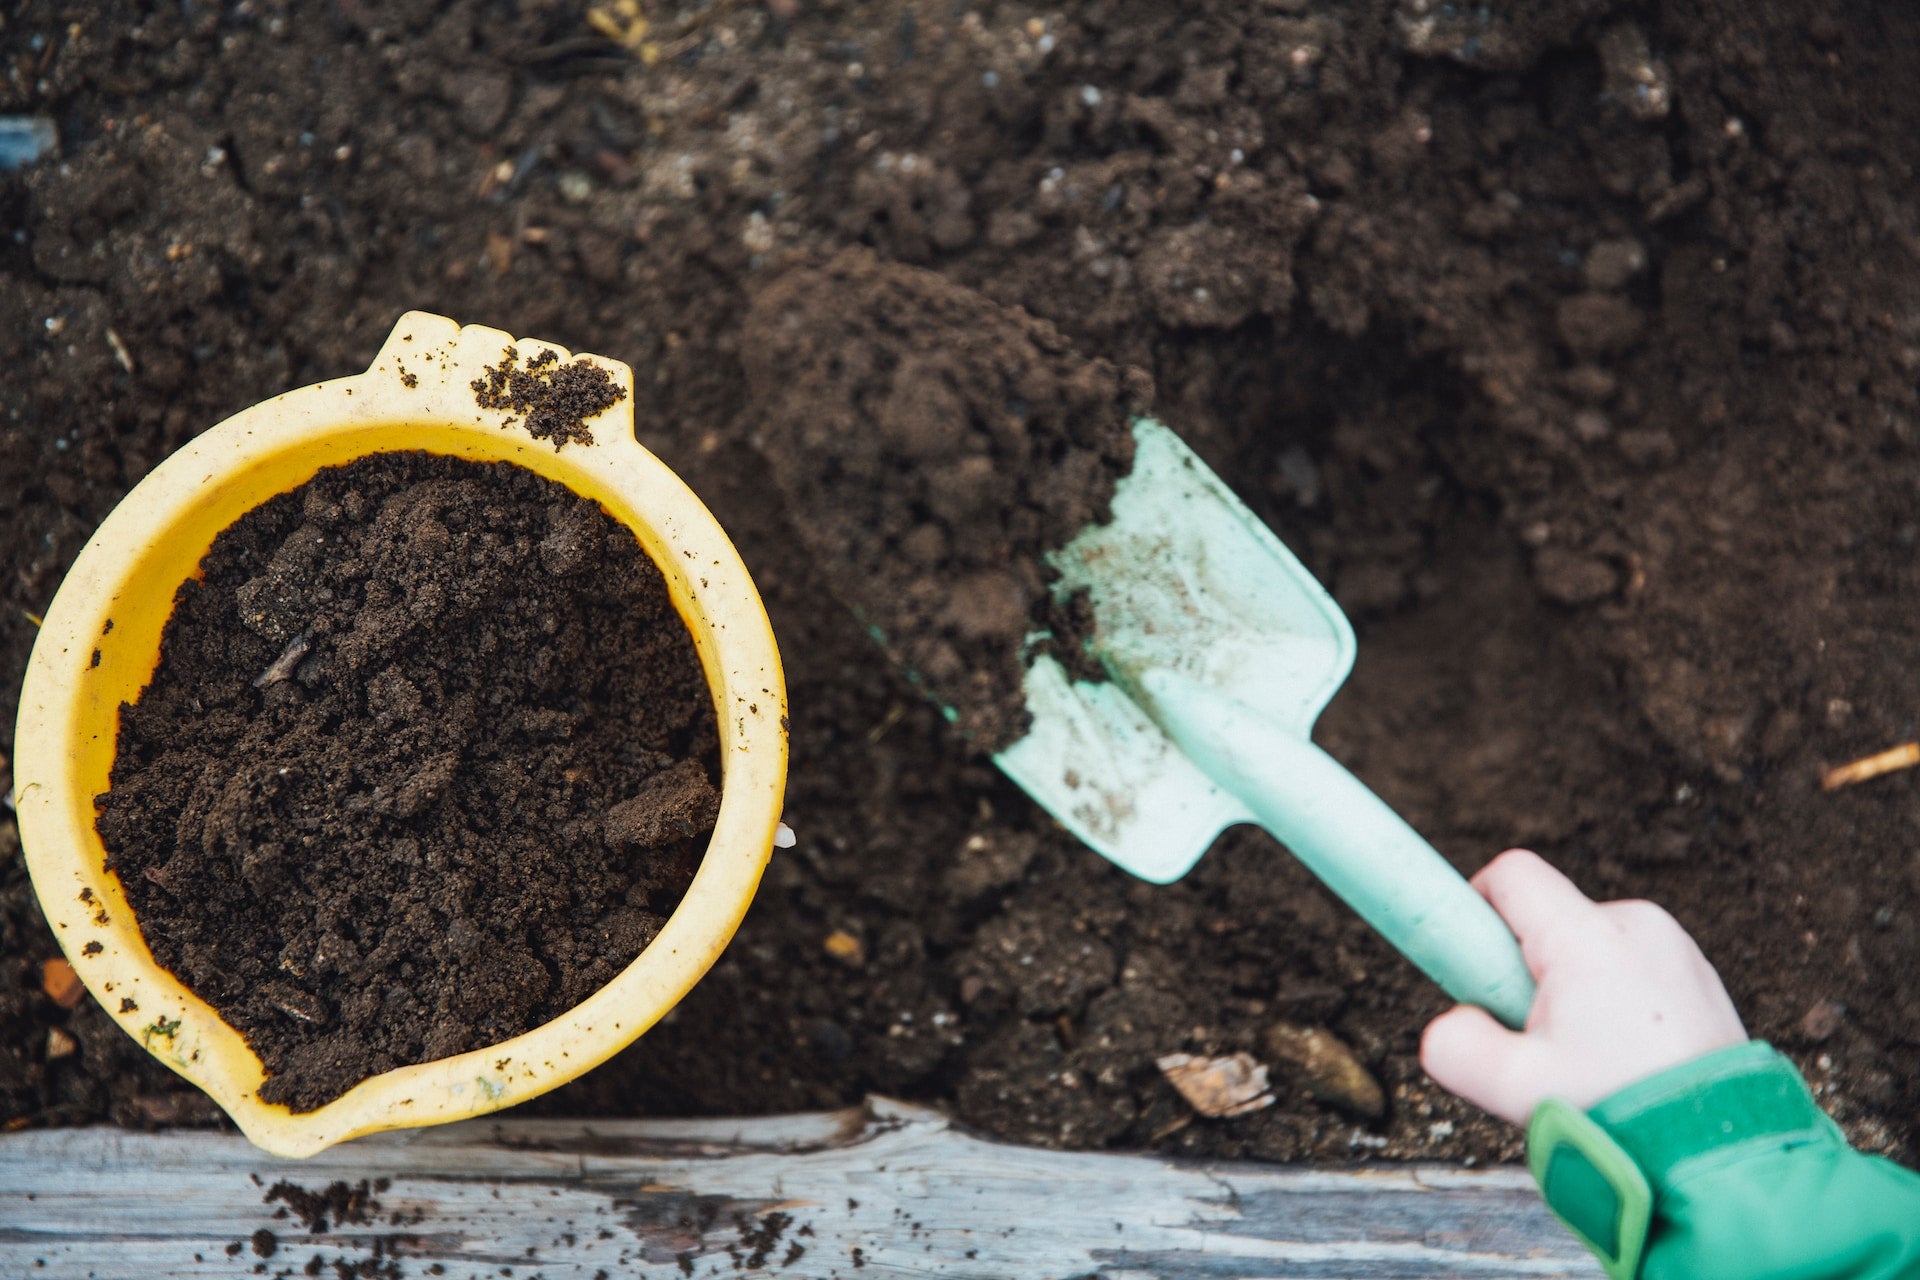 A Guide to Composting: Turn Food Waste Into Garden Gold